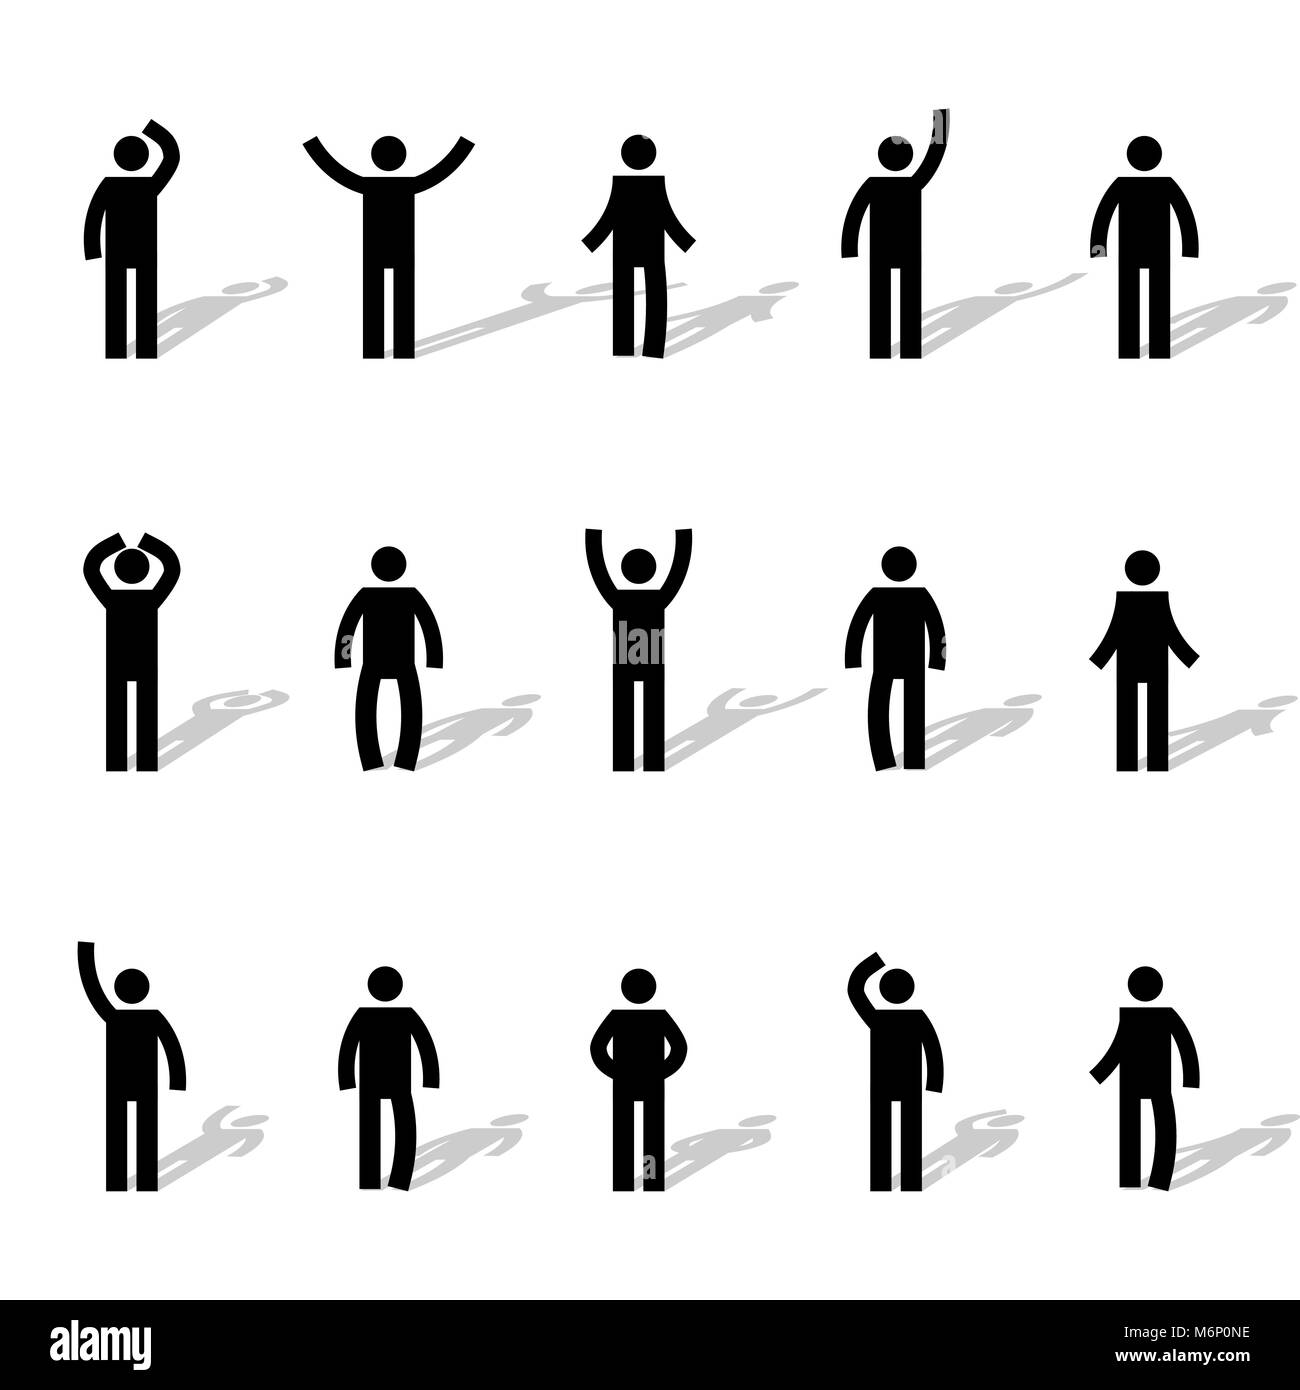 Single Stick Man Images – Browse 5,498 Stock Photos, Vectors, and